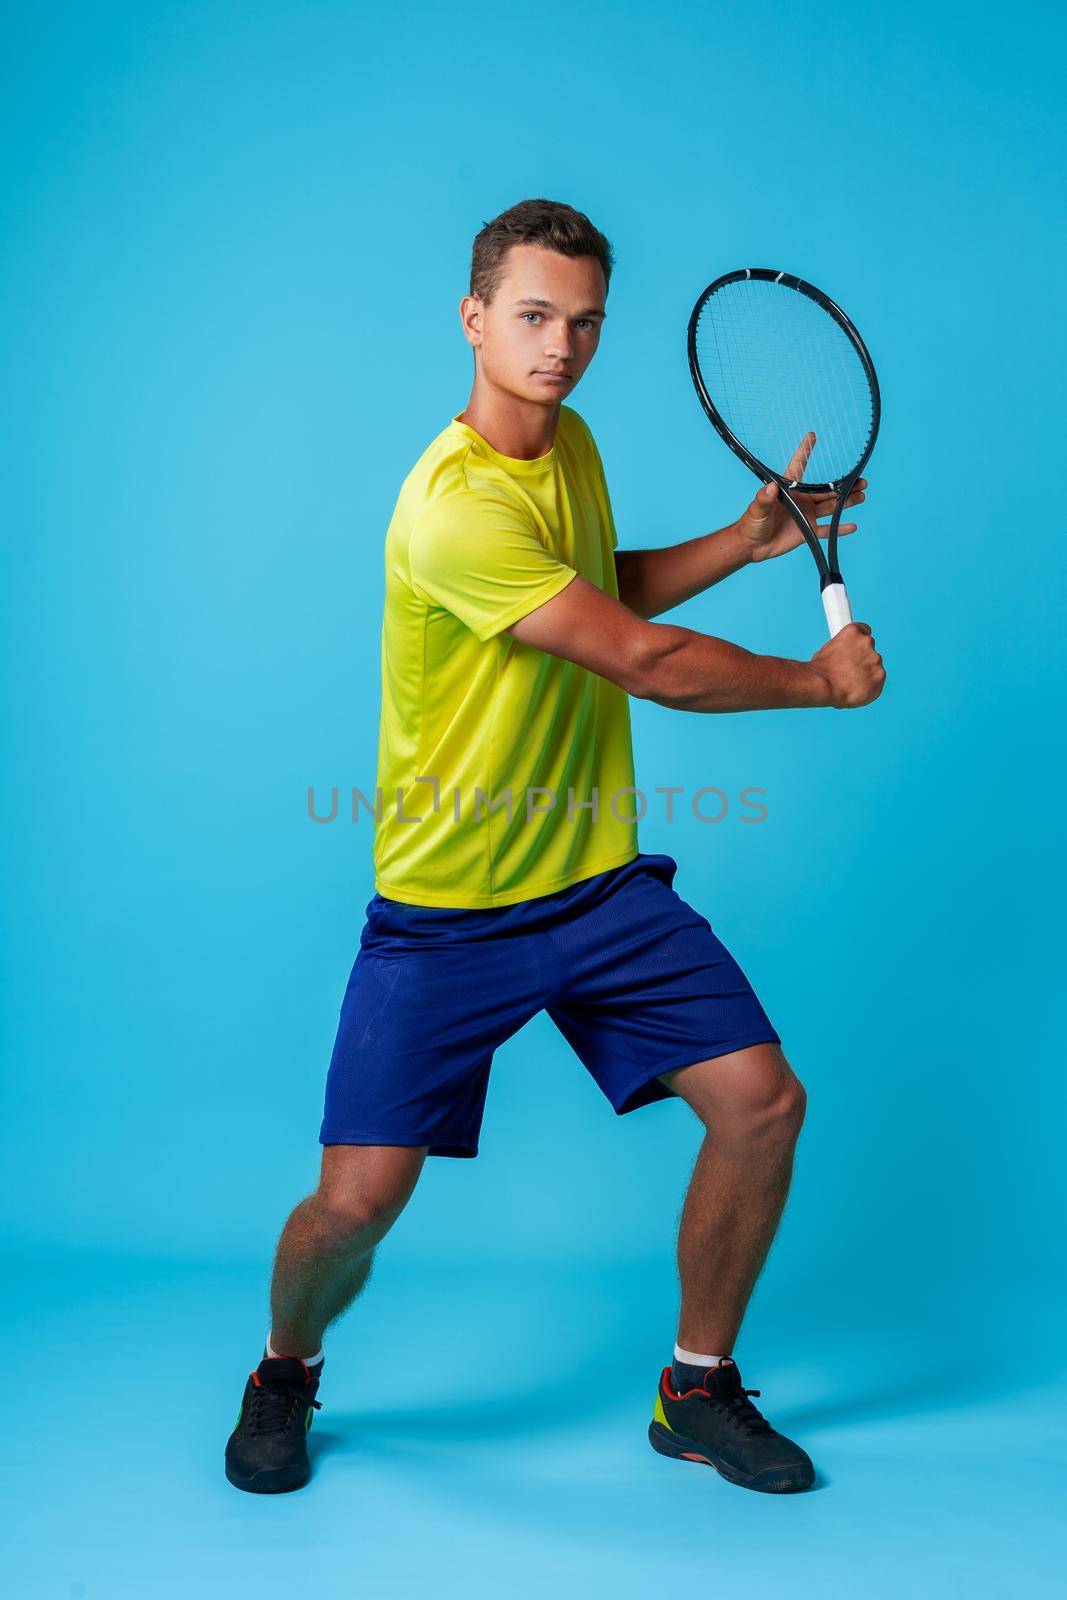 Full length studio portrait of a tennis player man on blue background close up